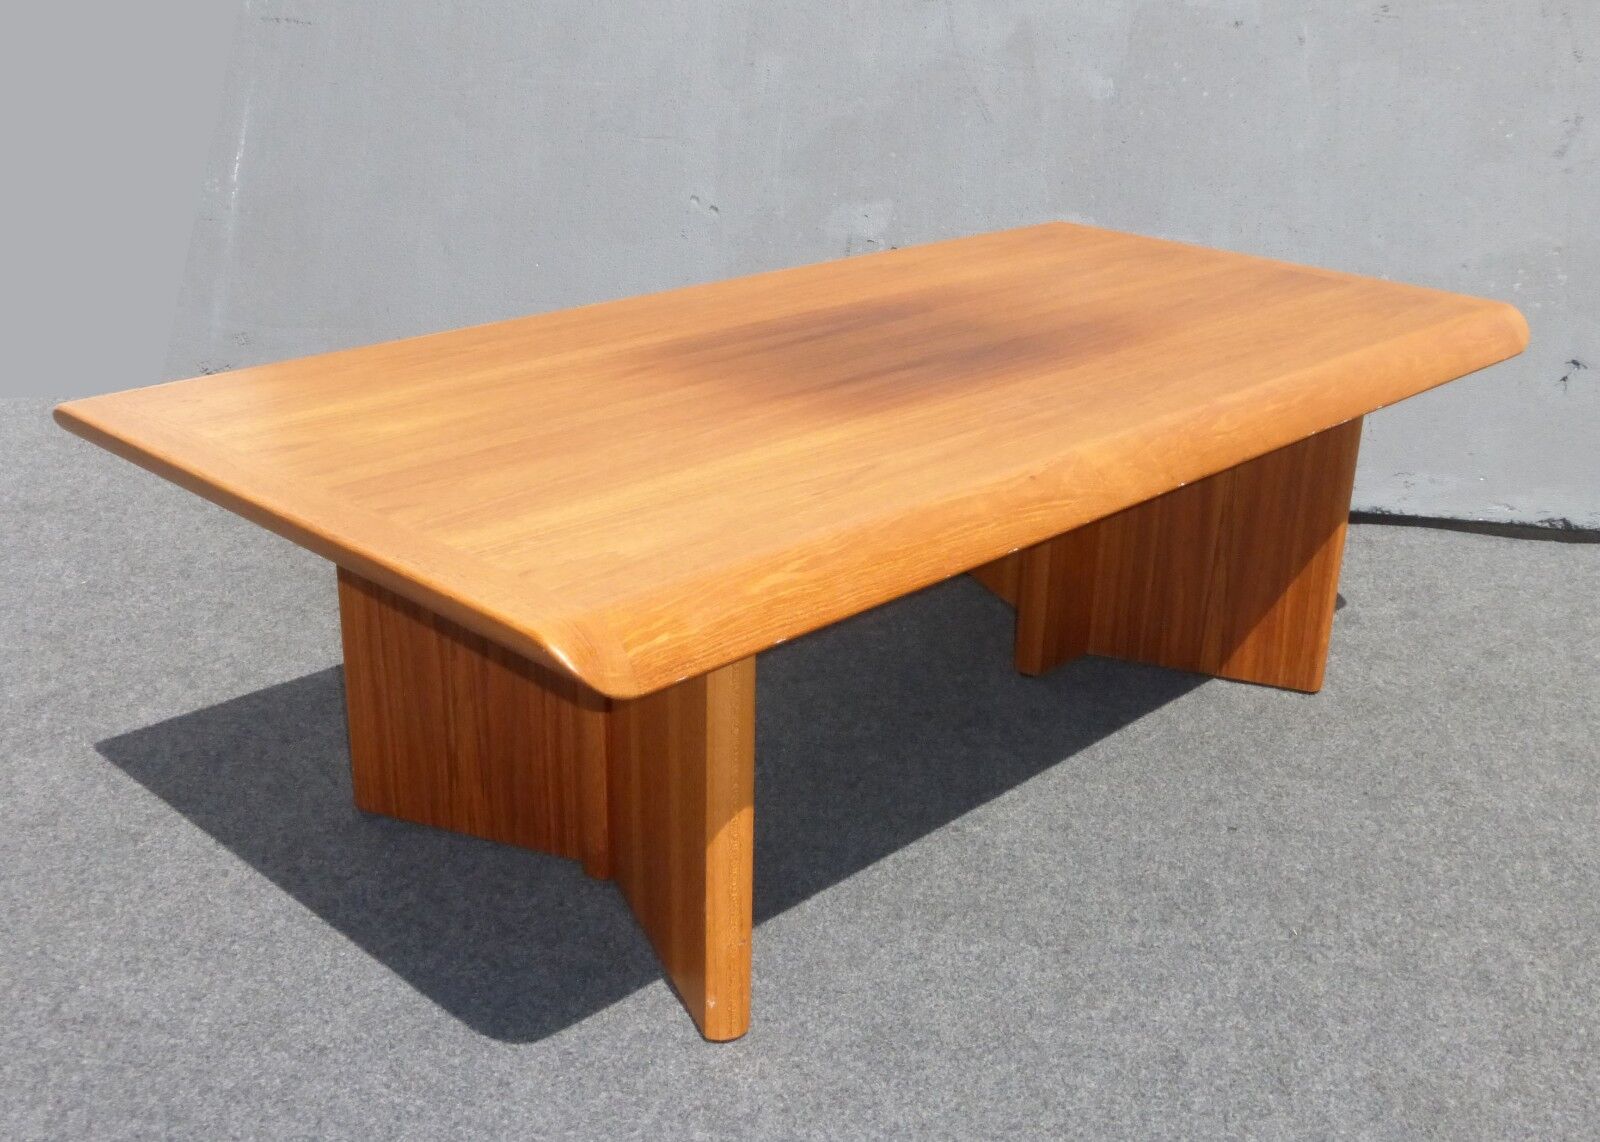 Vintage Danish Modern Teak COFFEE TABLE Made in Canada by NORDIC Furniture 